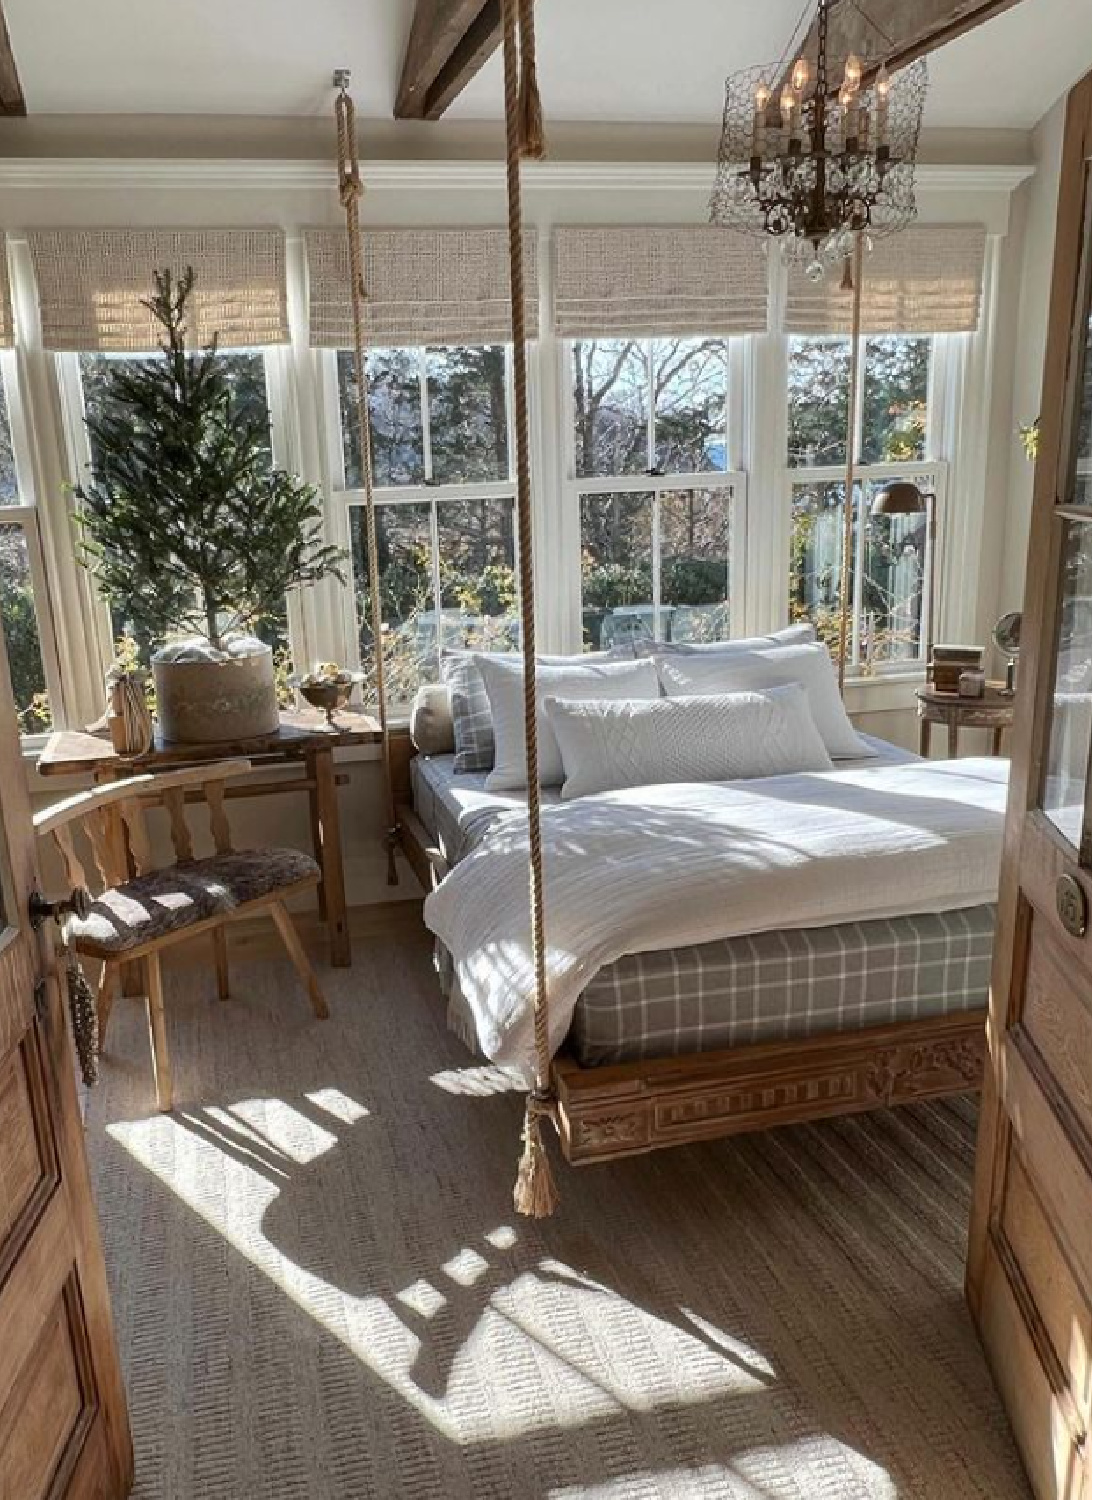 Beautiful rustic cottage style bedroom with raw organic wood and rope bed - @oldsilvershed.